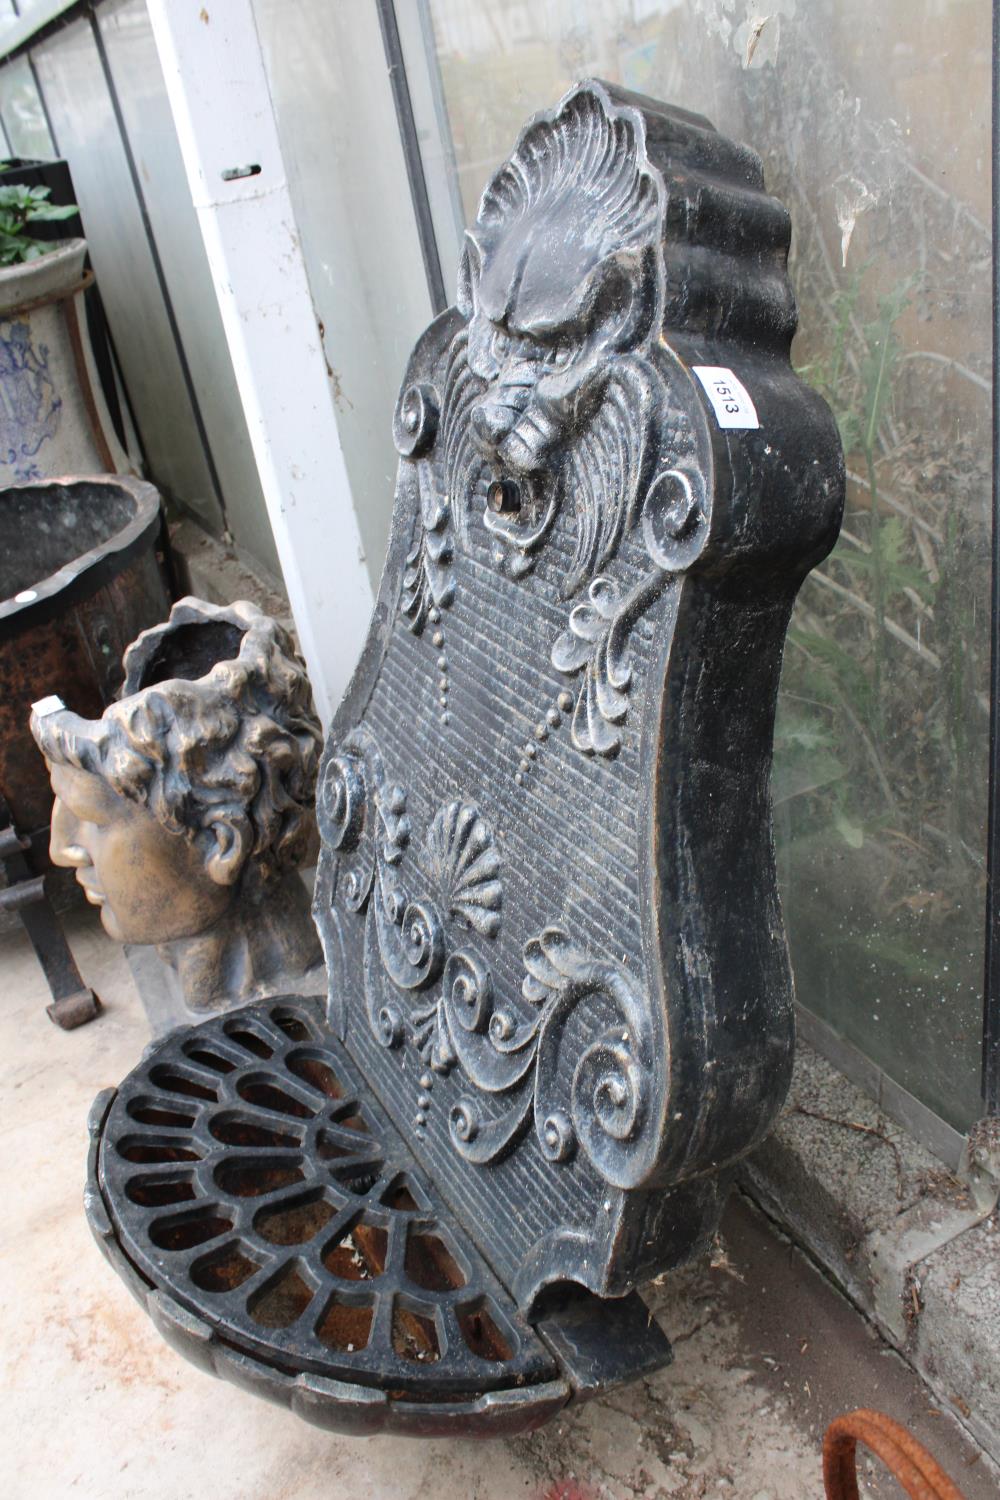 A VINTAGE HEAVY DECORATIVE LION HEAD CAST IRON WALL MOUNTED WATER FEATURE (H:82CM W:49CM) - Image 3 of 3